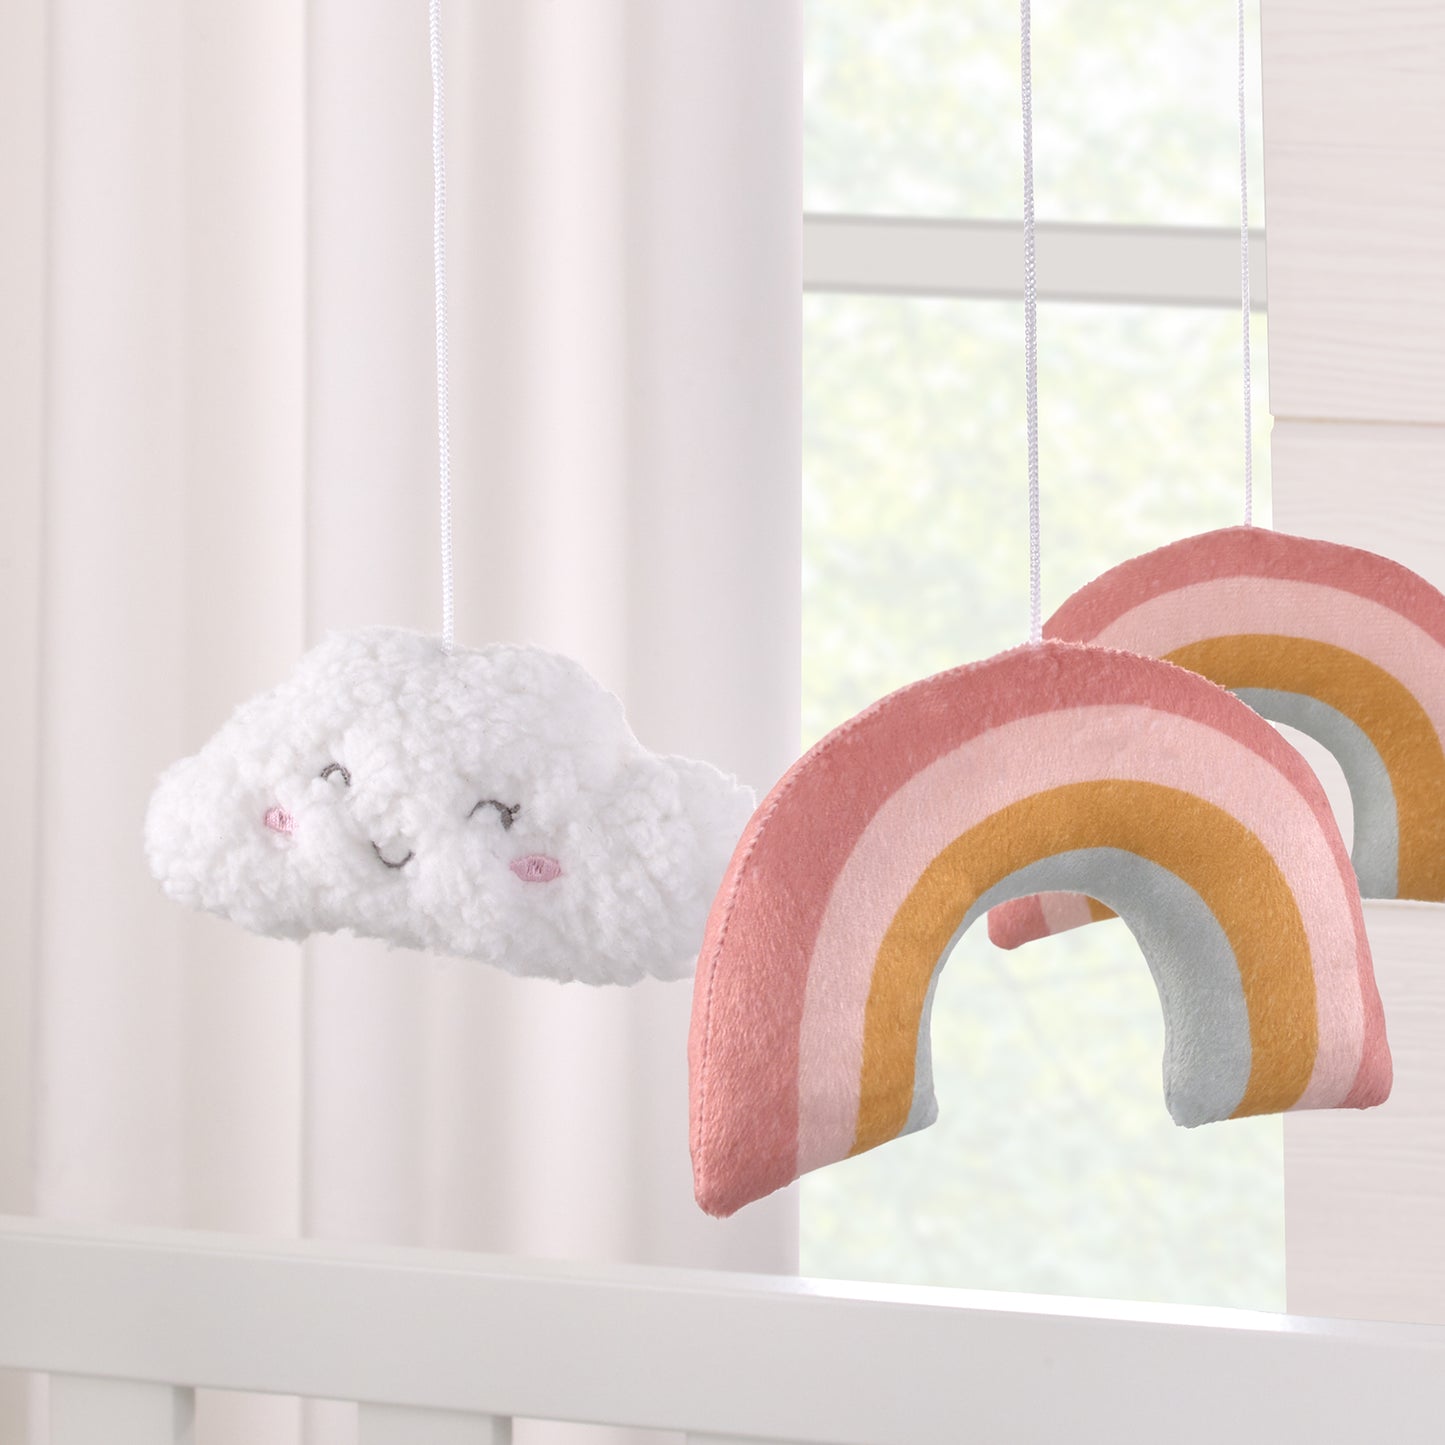 Carter's Chasing Rainbows - White, Peach, Pink, and Gold Clouds and Rainbows Musical Mobile